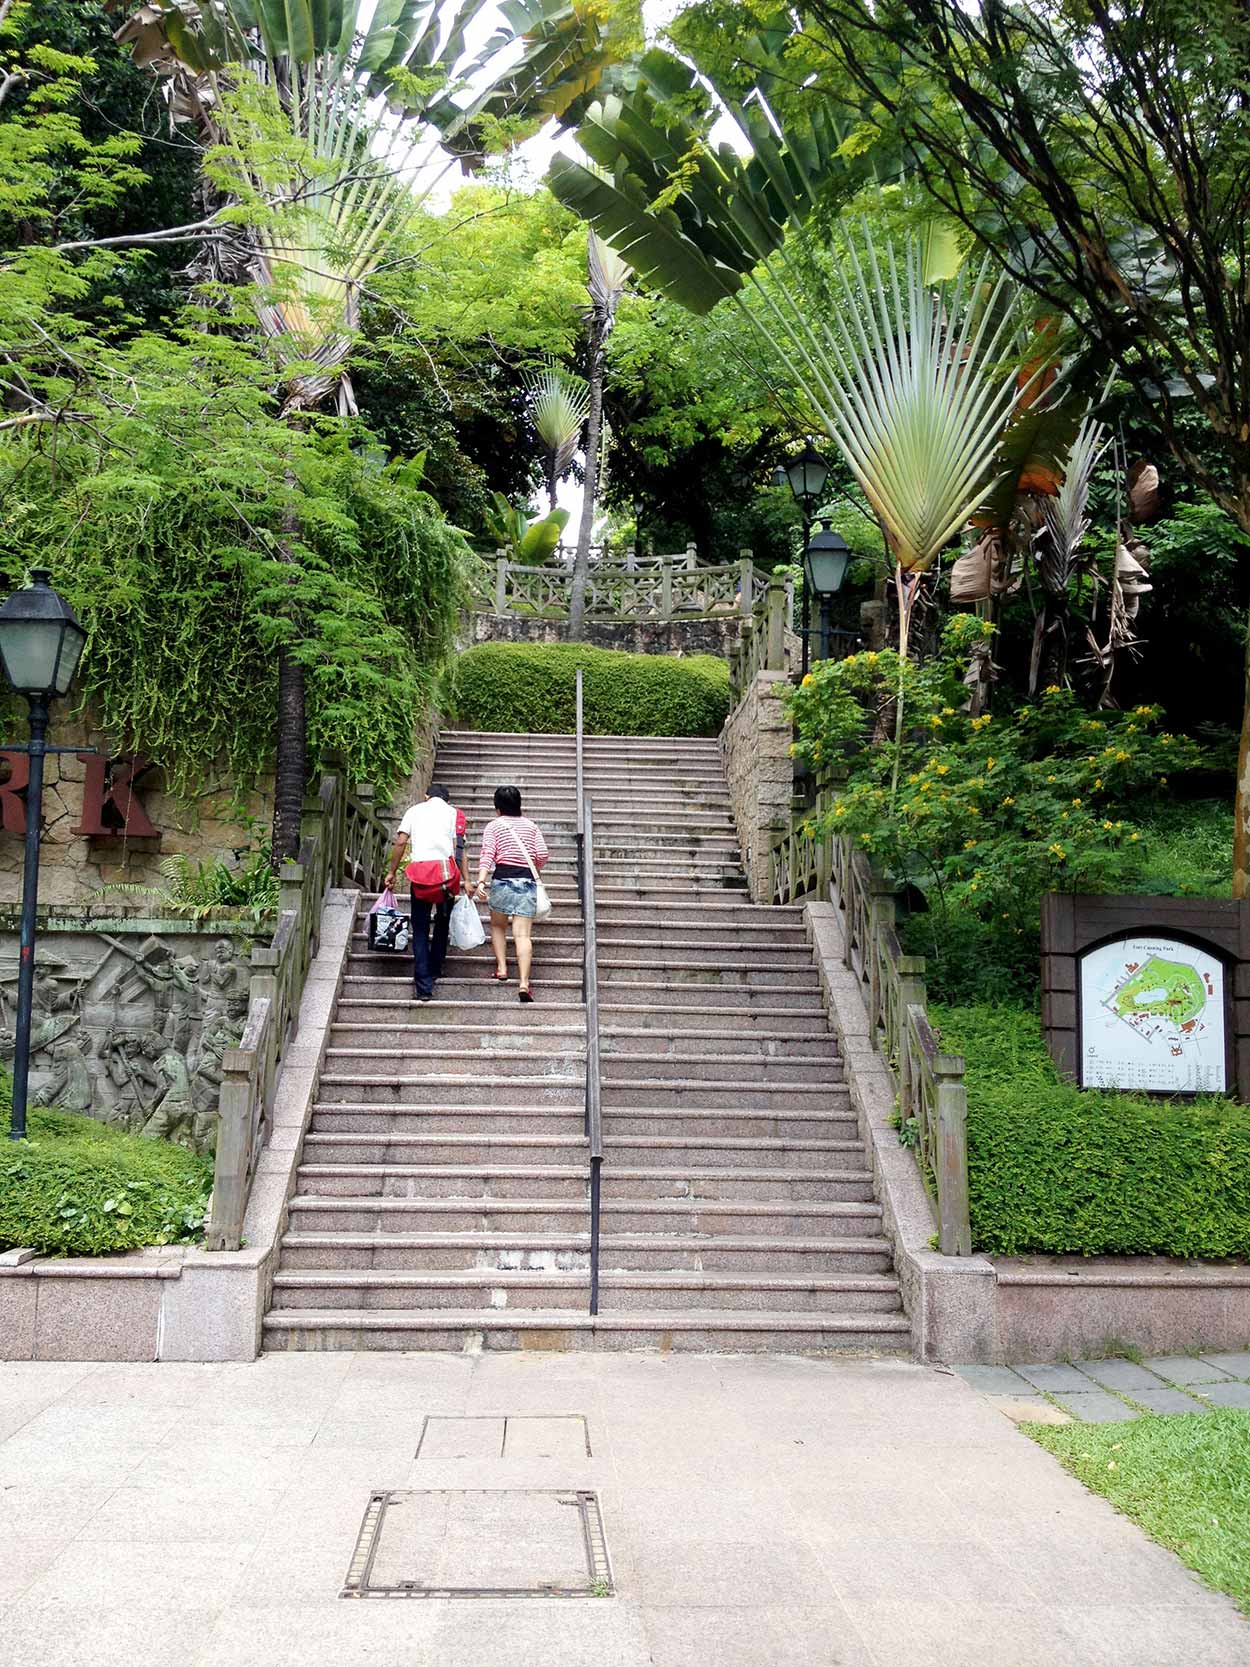 The staircase leading into Fort Canning Park, Singapore